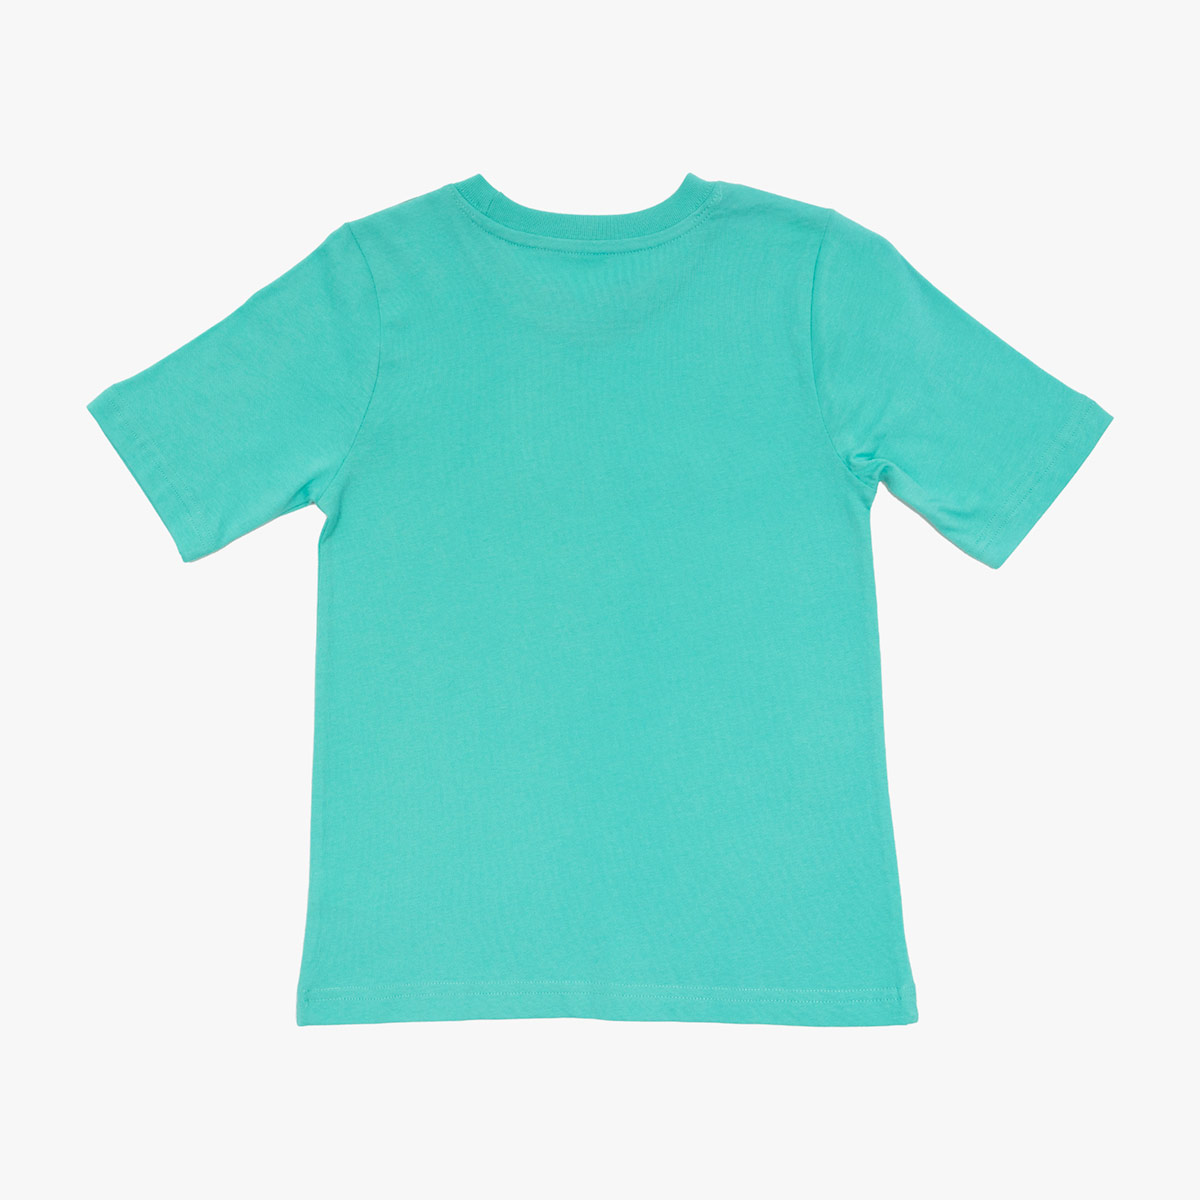 Youth Fit Pop of Color Tee in Teal image number 2